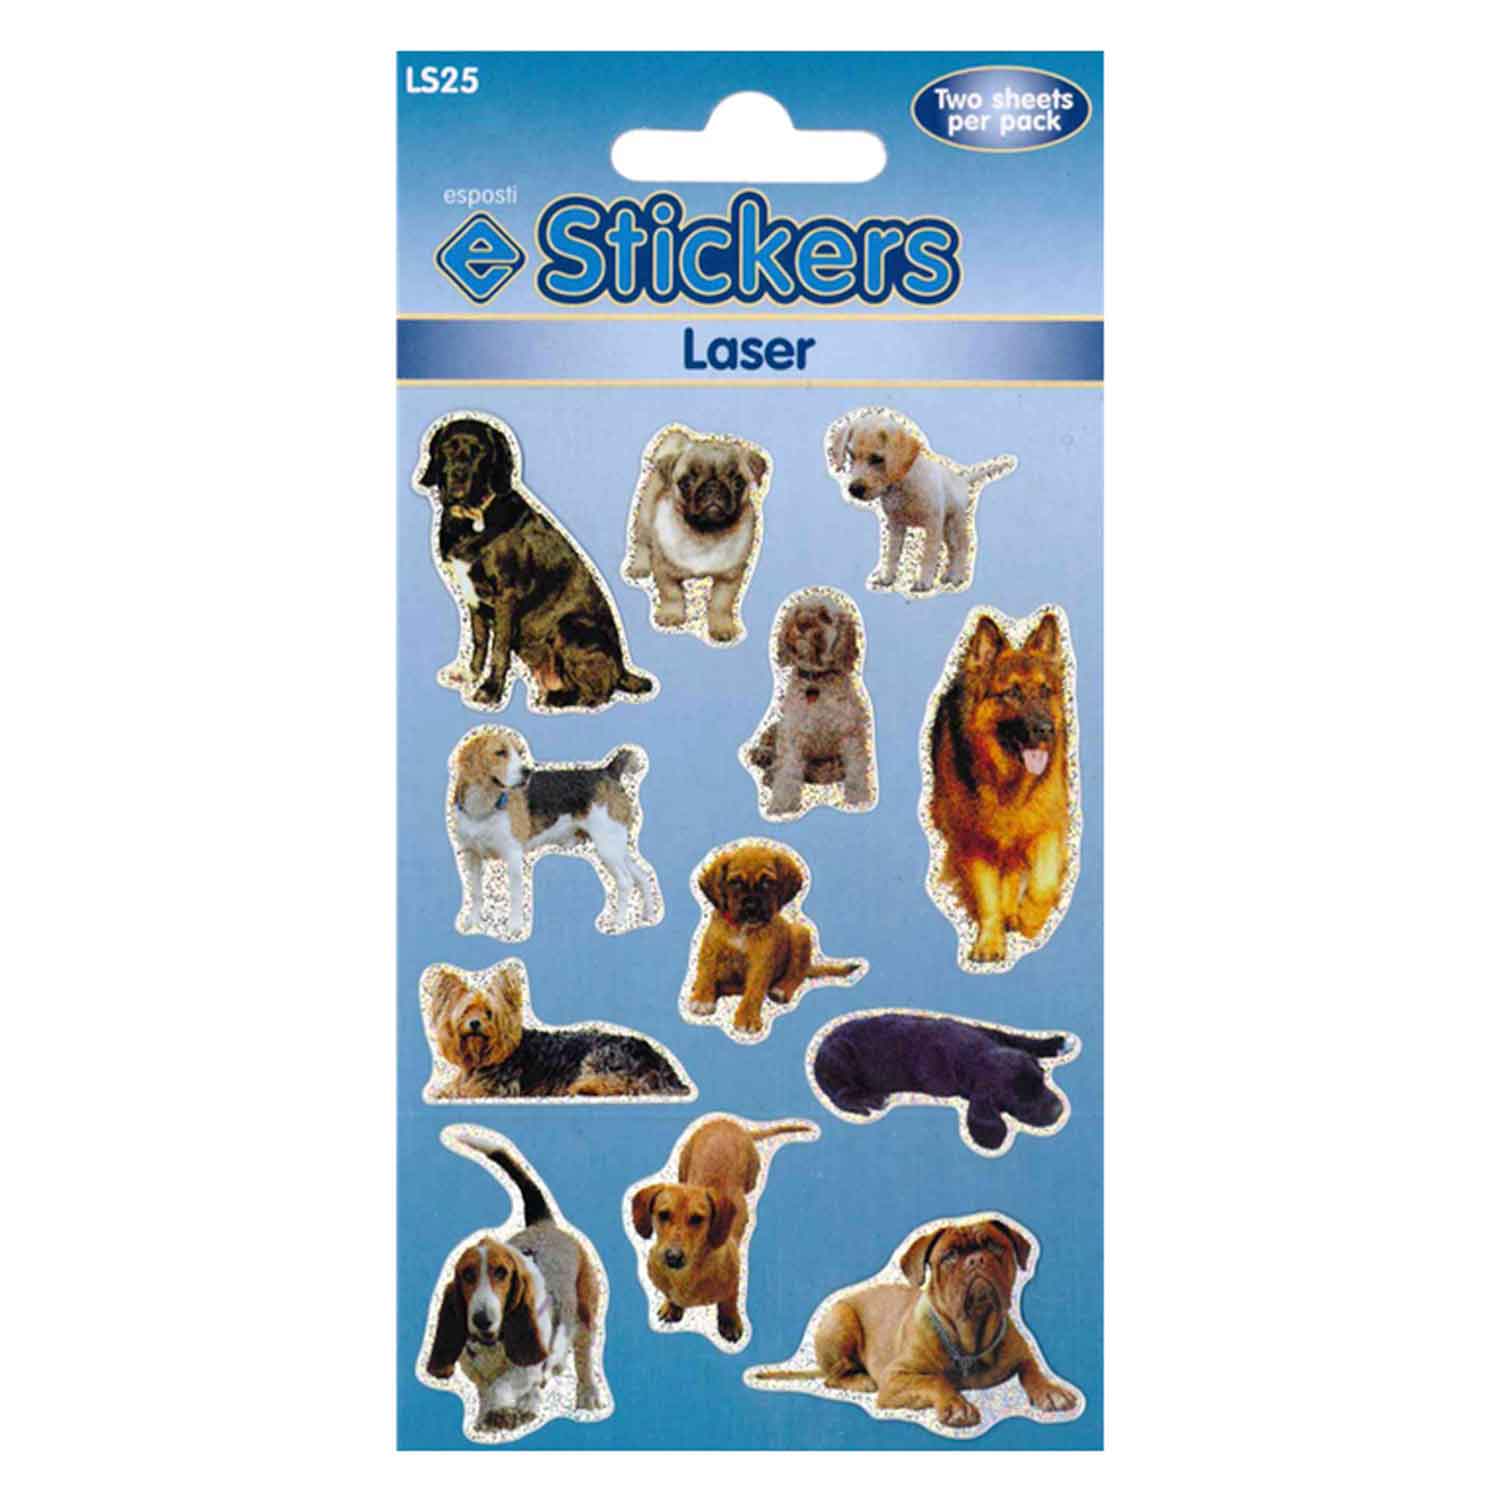 Dogs & Puppies Self Adhesive Laser Novelty Stickers - Pack of 10